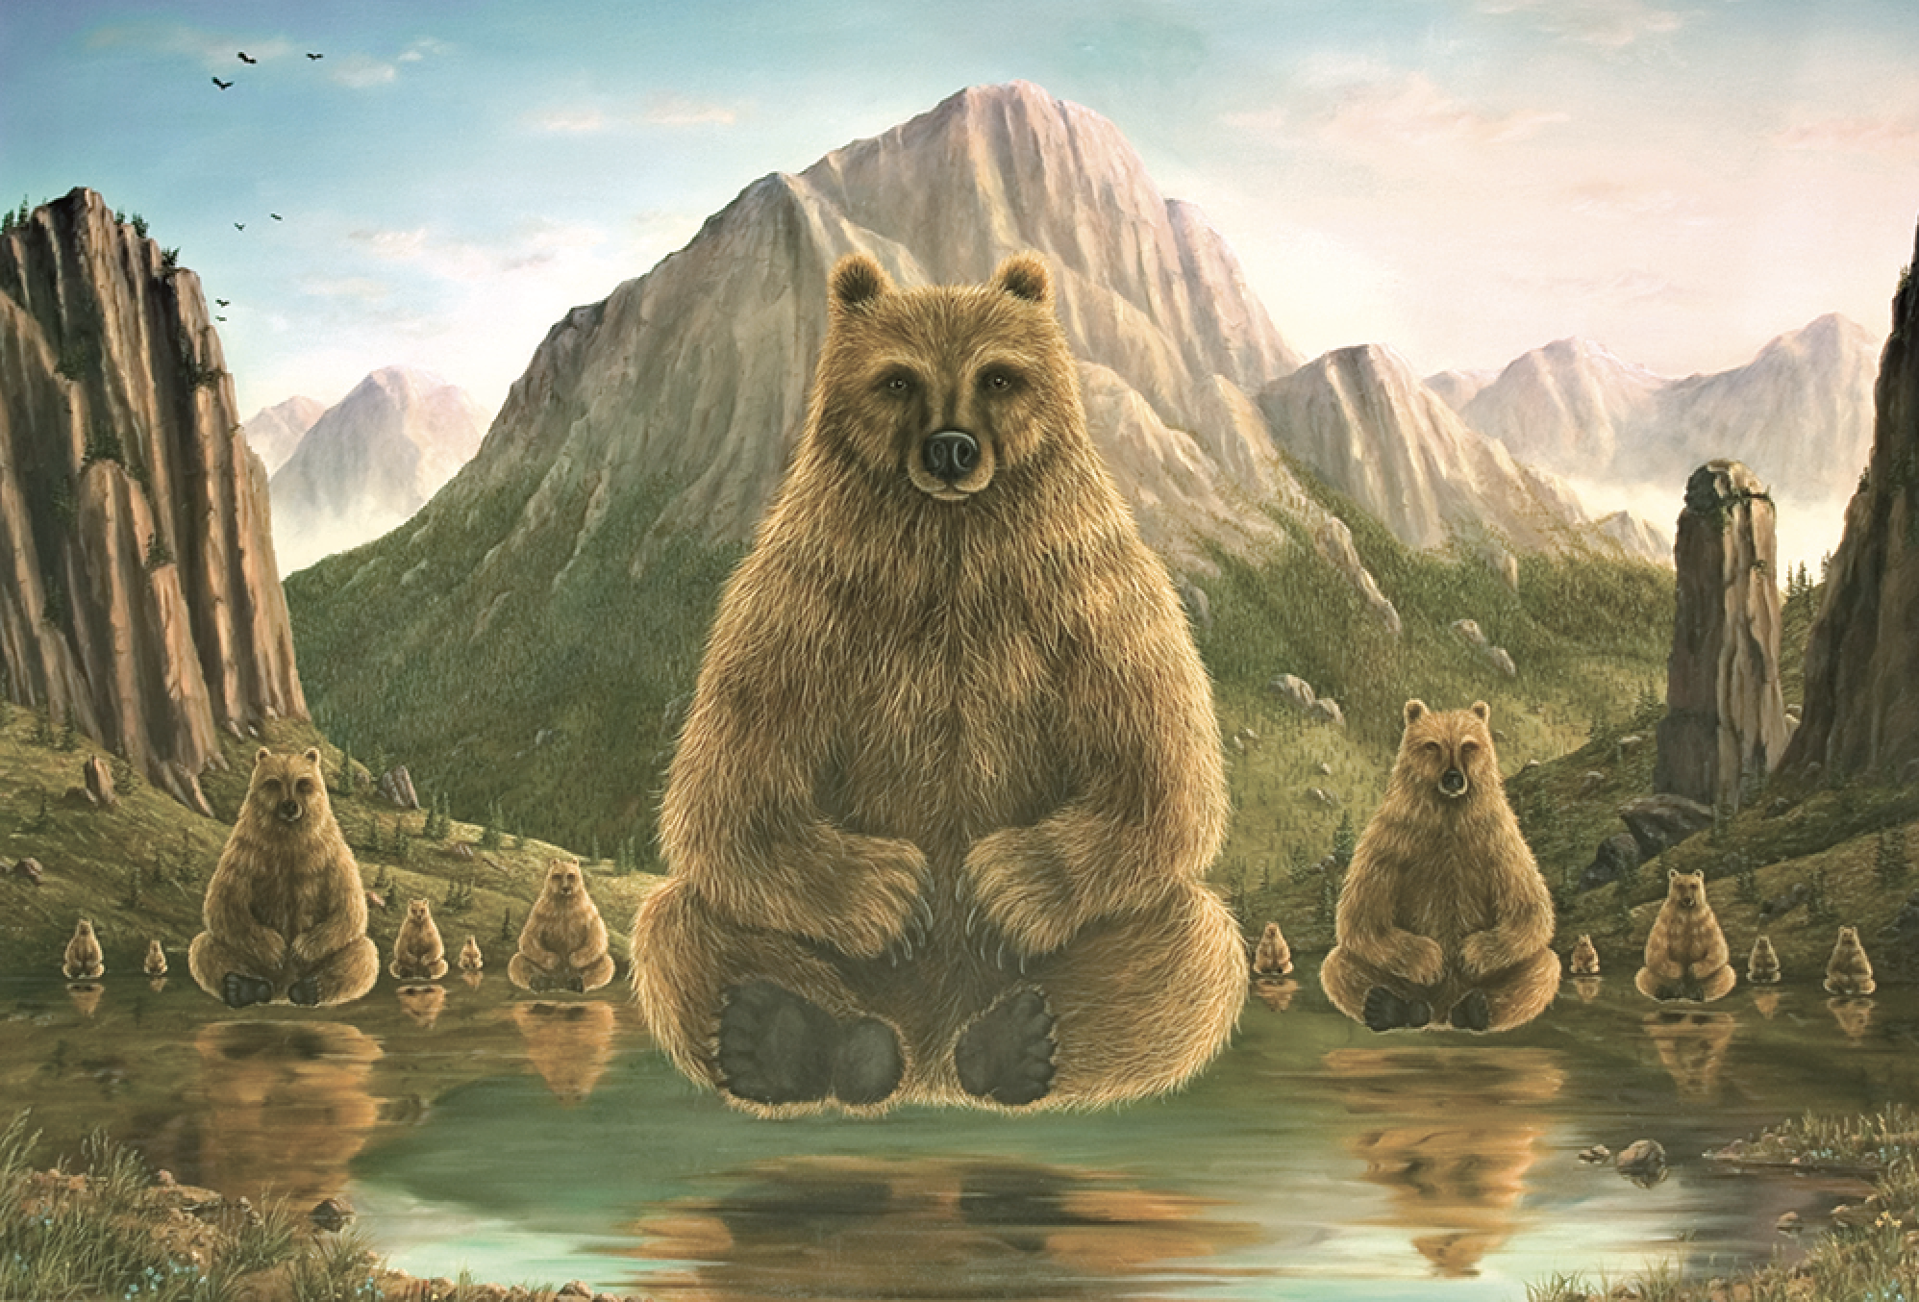 The Guides by Robert Bissell